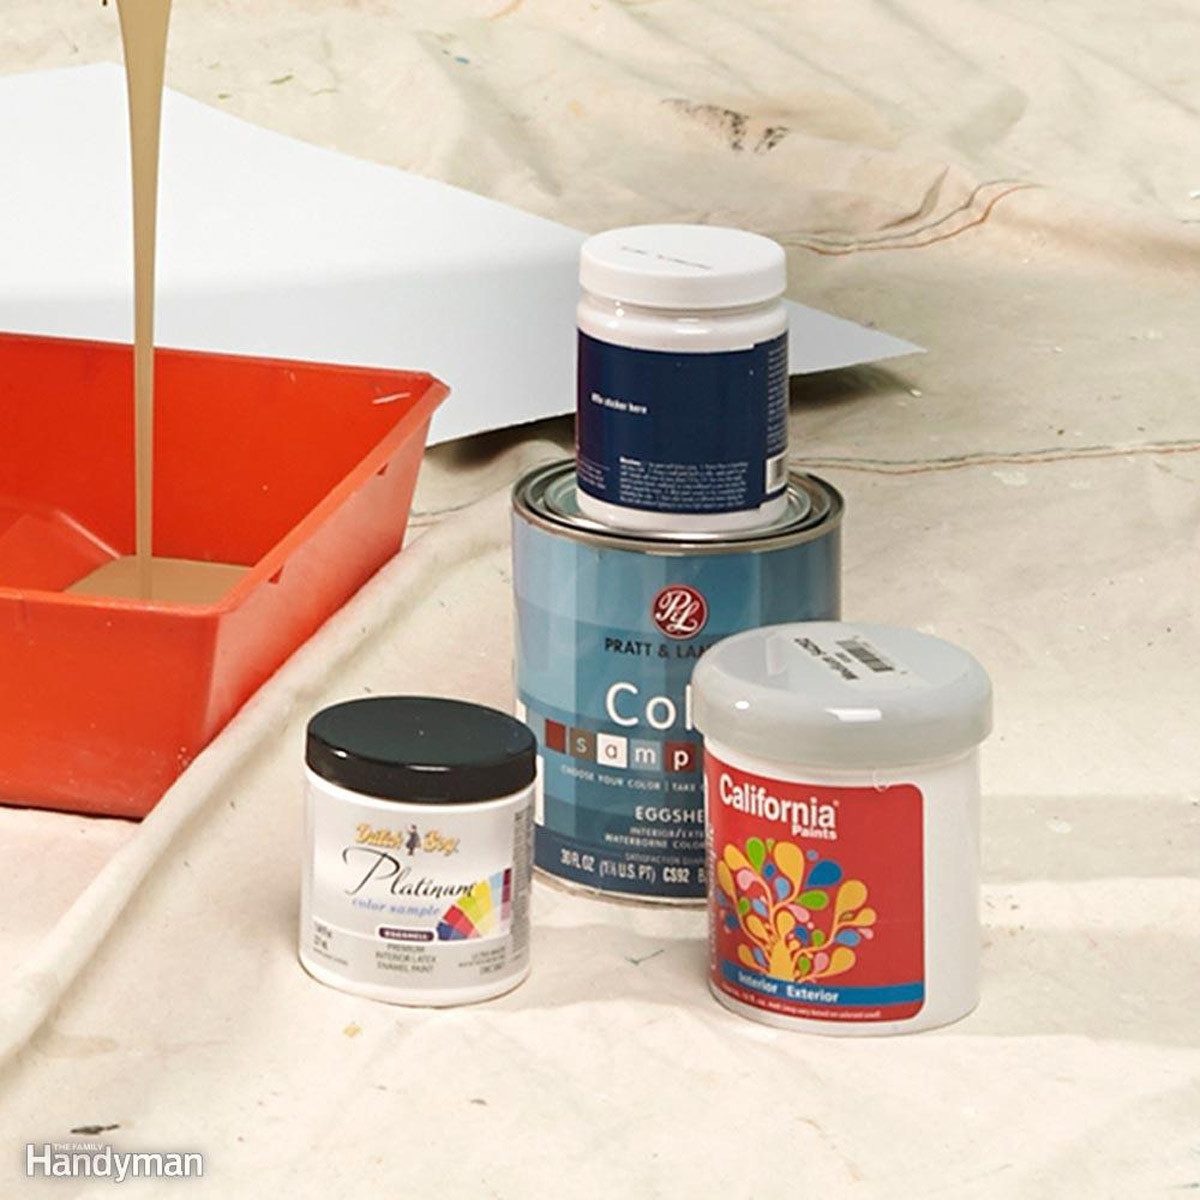 How to Prep for Painting: Planning and Lead Paint Awareness